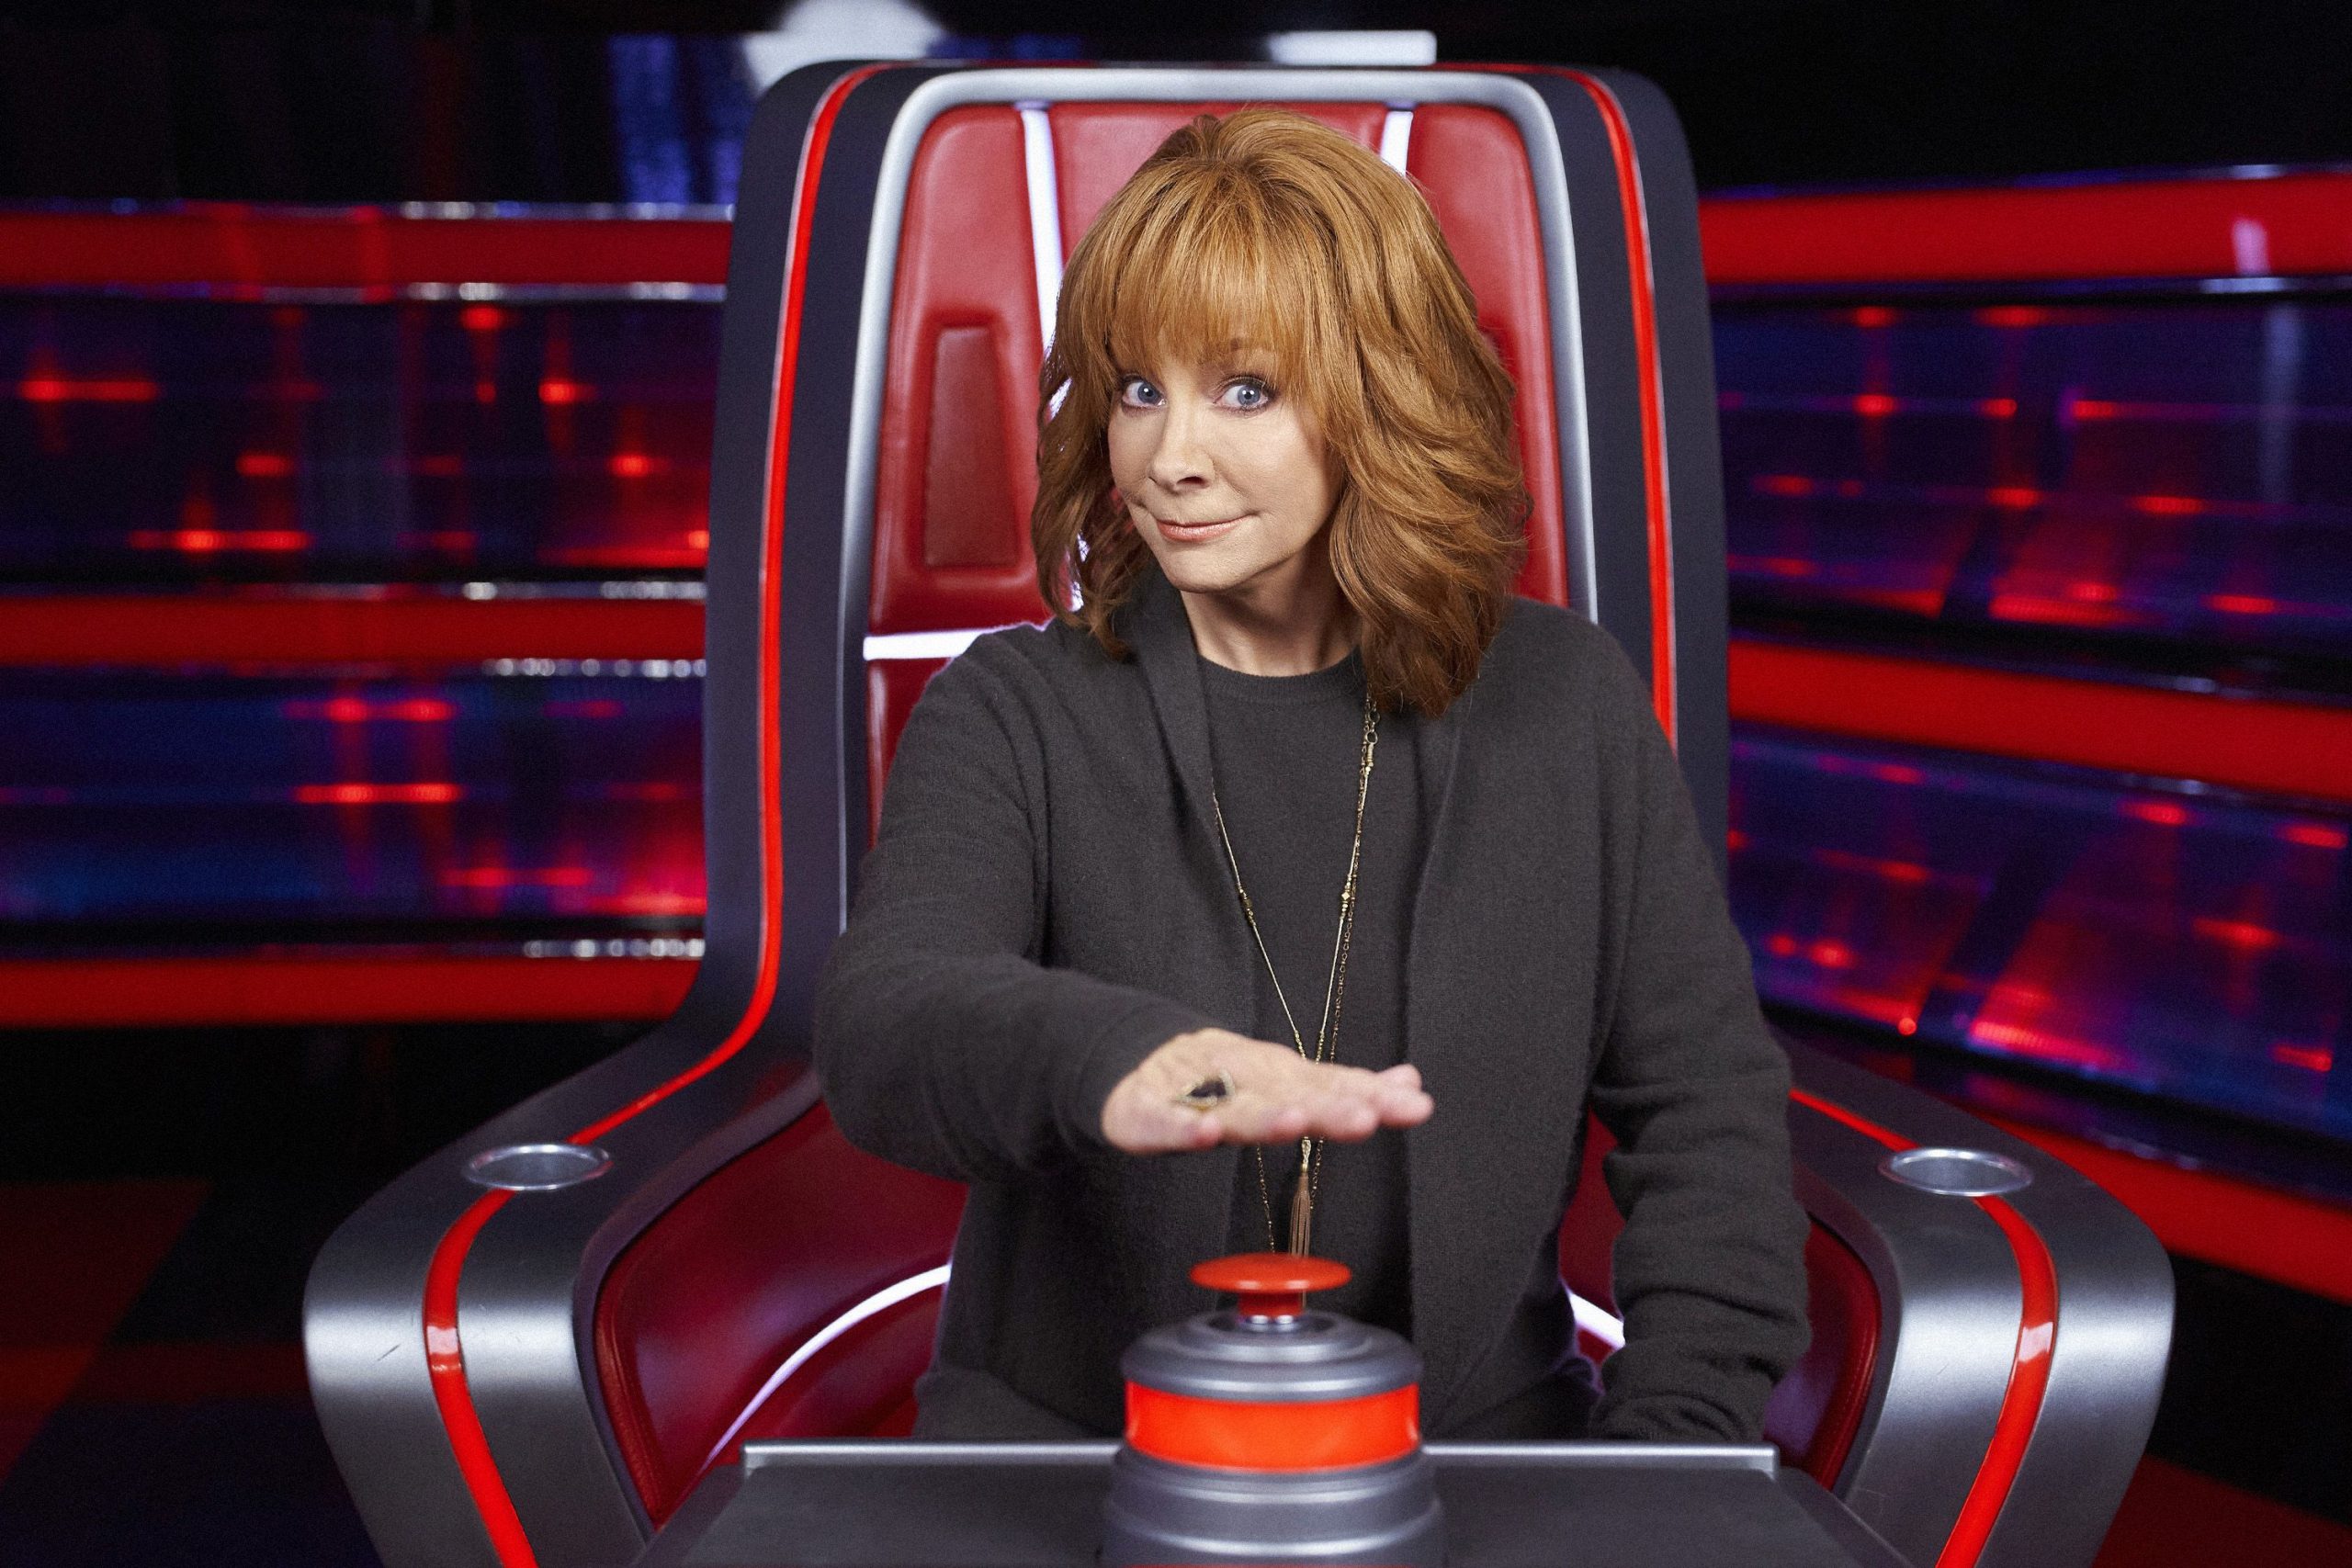 REBA MCENTIRE TO EXTEND RUN AS COACH WITH NBC’S ‘THE VOICE,’ SIGNS ON FOR SEASON 25